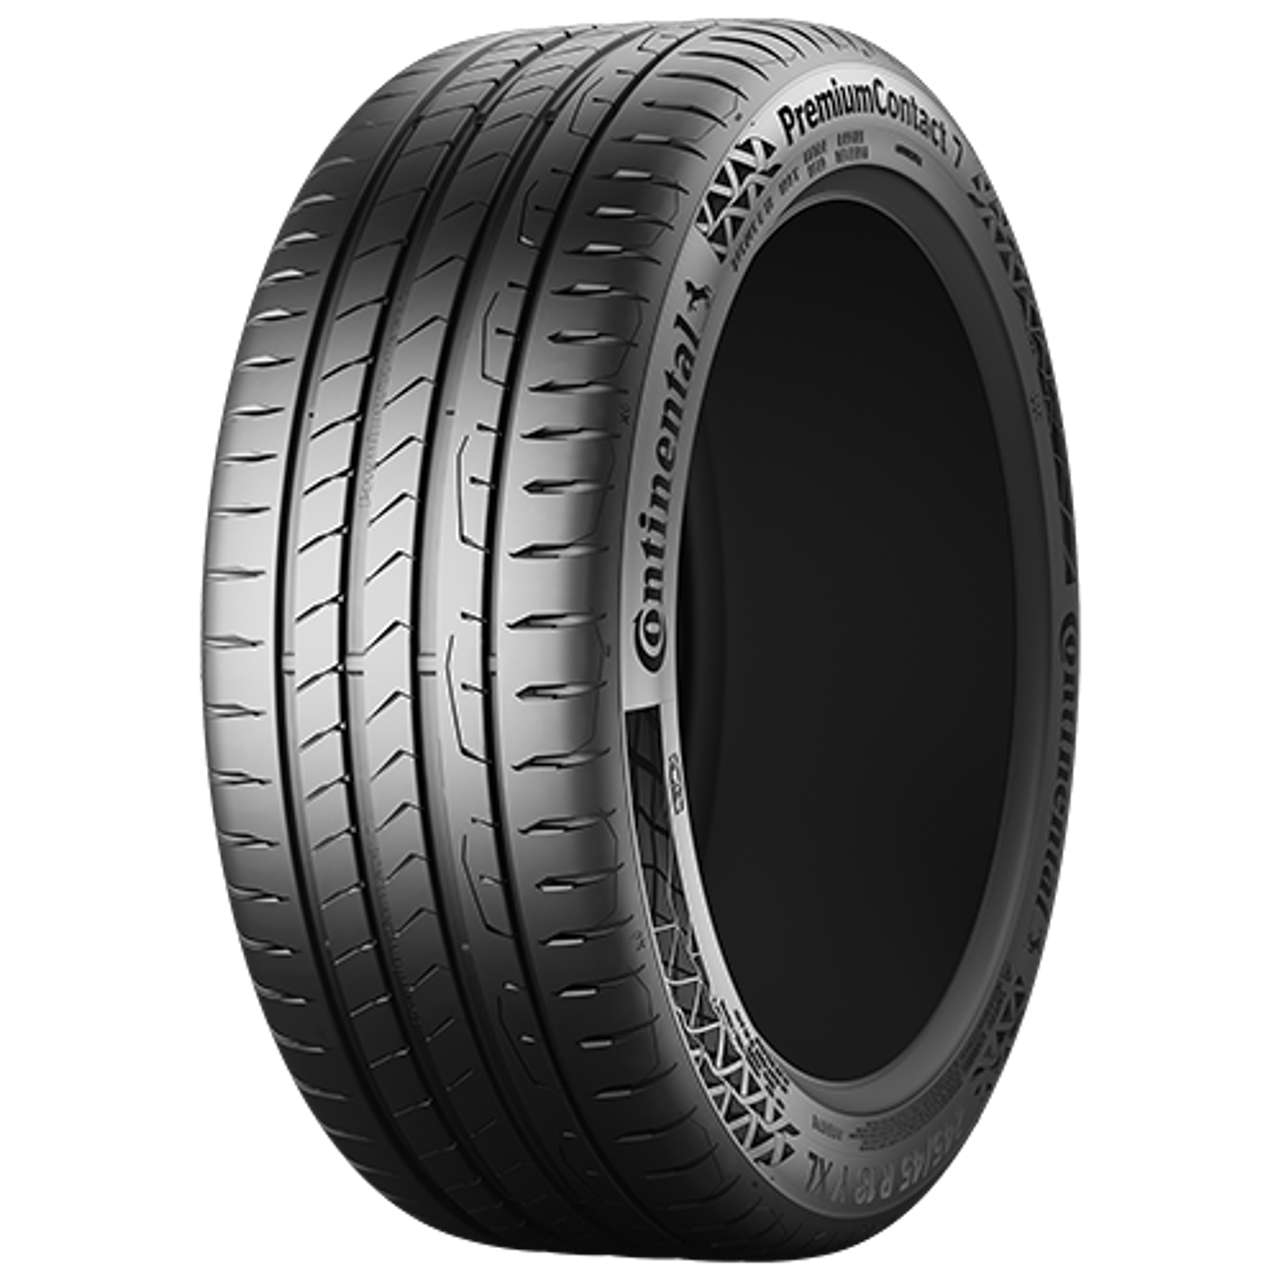 CONTINENTAL PREMIUMCONTACT 7 (EVc) 215/65R17 99V FR BSW